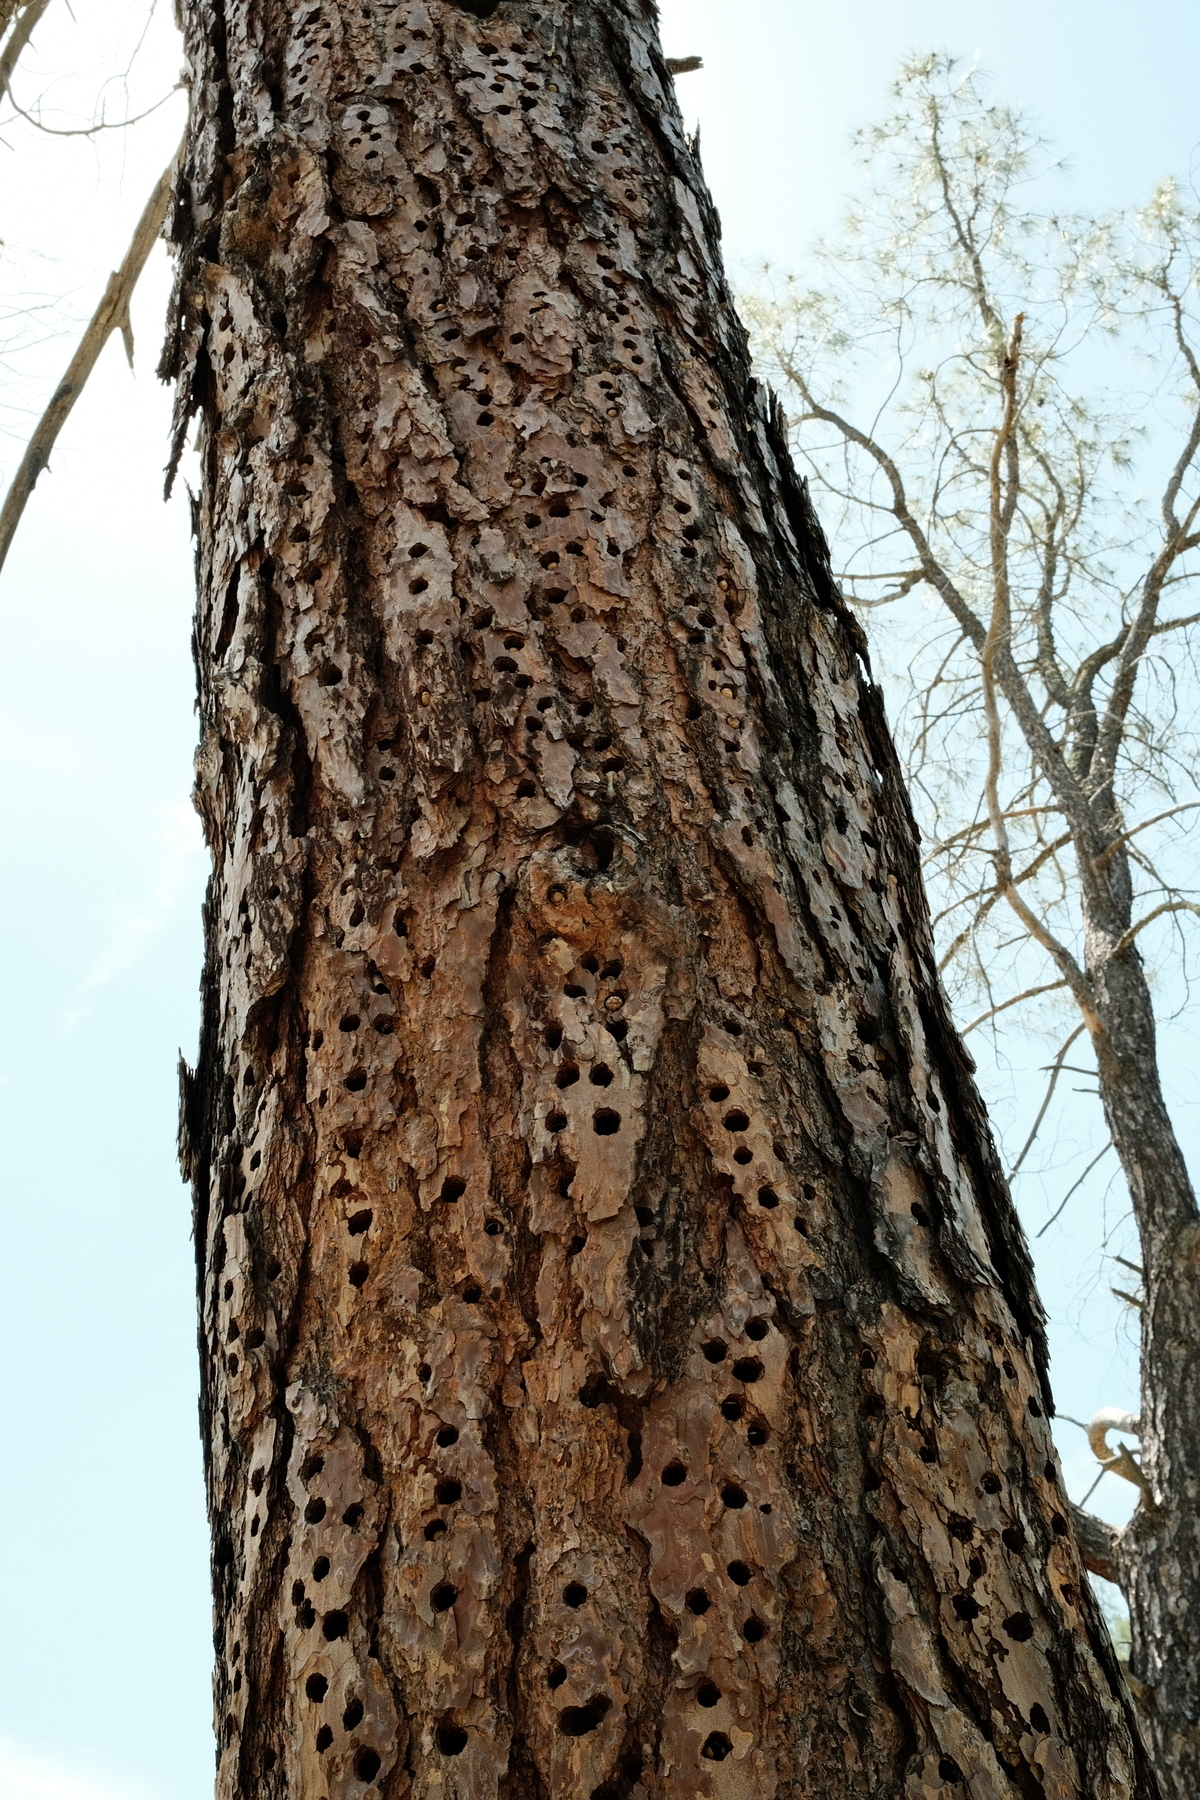 A dead pine tree pecked full of holes meant for woodpeckers to store acorns.